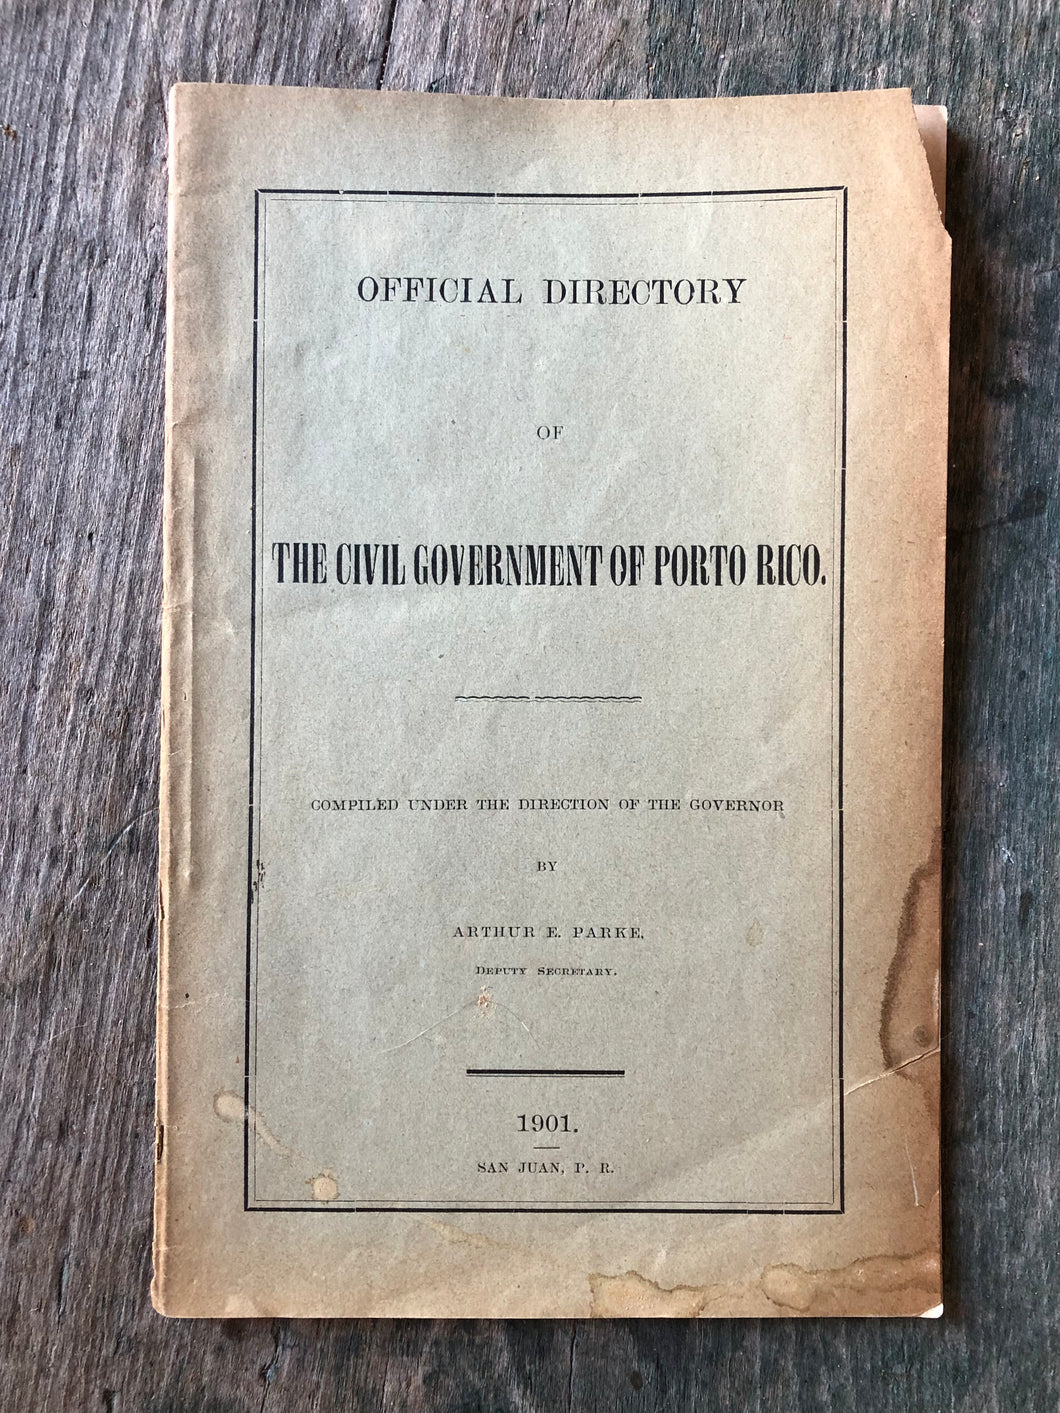 Official Directory of the Civil Government of Porto Rico. Compiled Under the Direction of the Governor by Arthur E. Parke